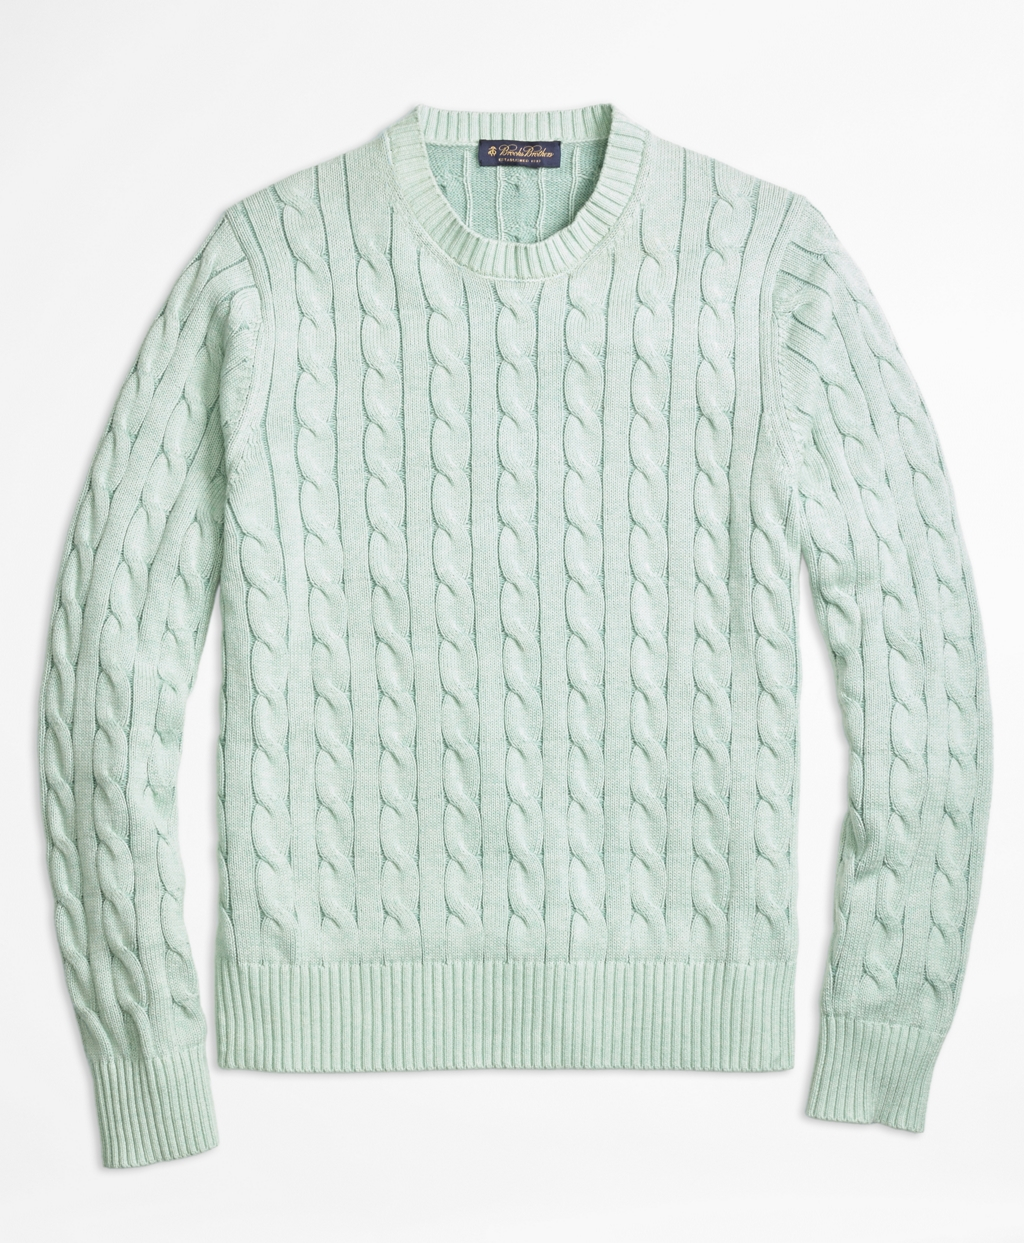 Brooks brothers Heathered Cable Knit Crewneck Sweater in Green for Men ...